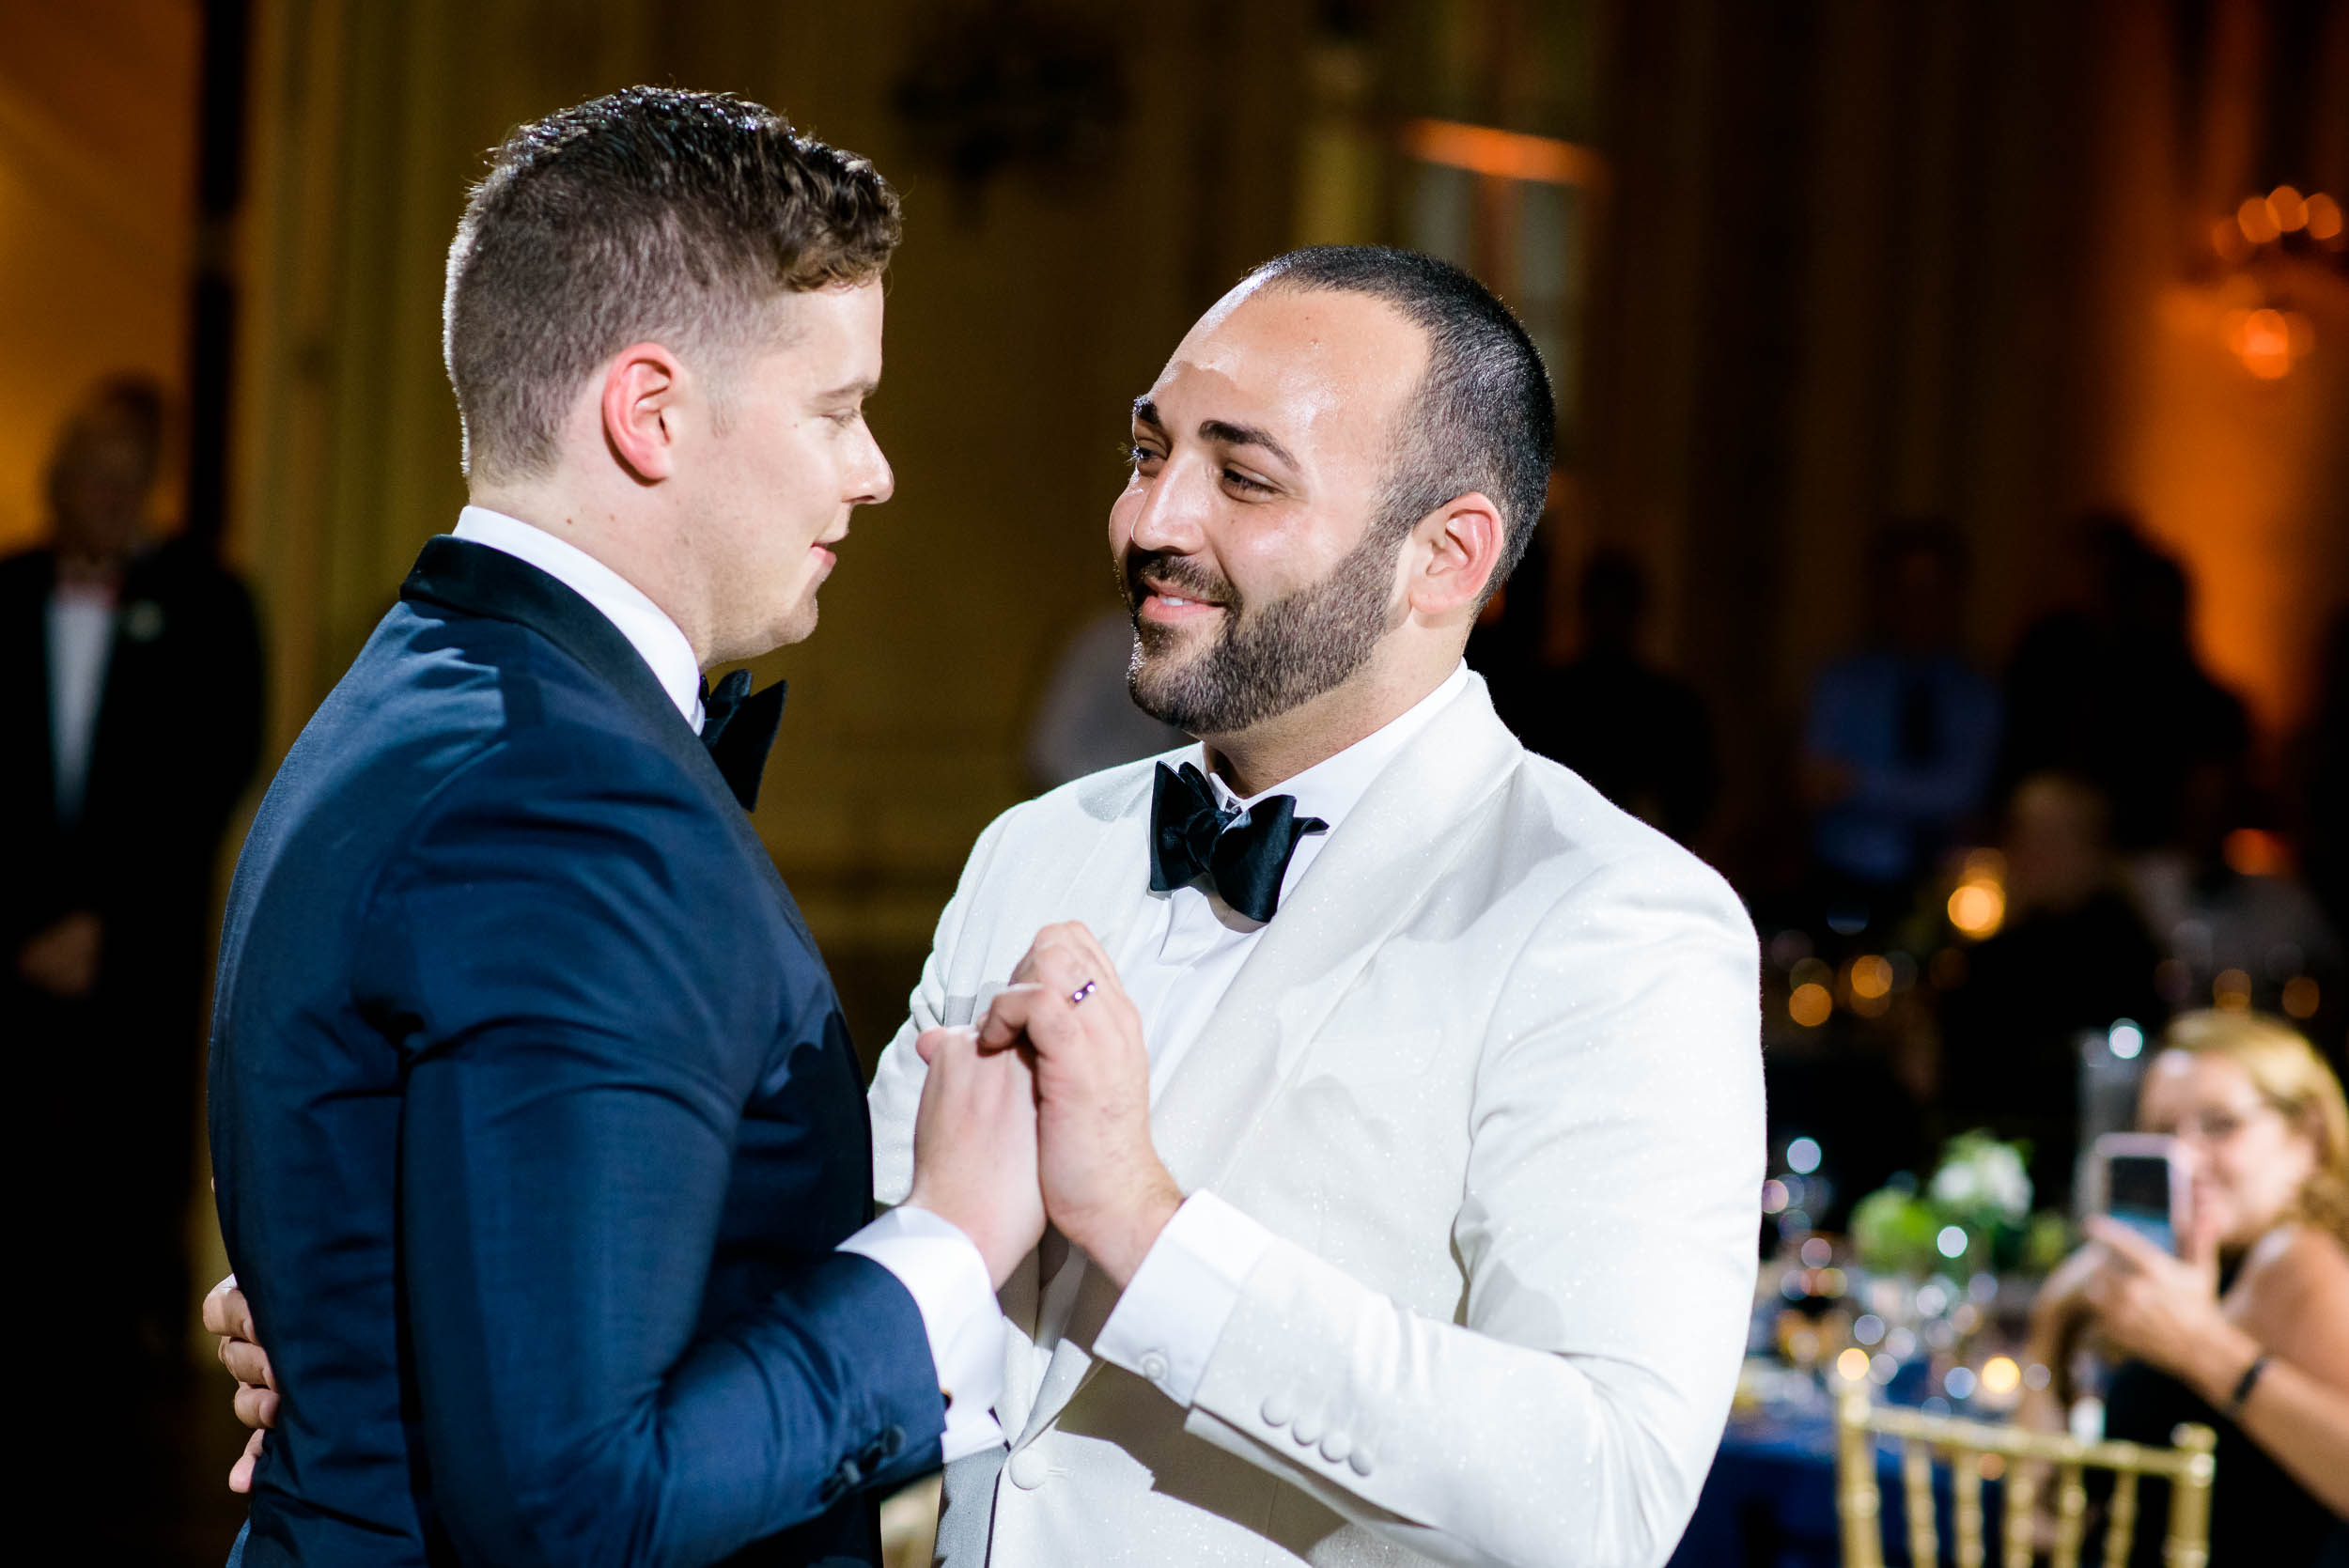 Grooms sharing a first dance for luxurious fall wedding at the Chicago Symphony Center captured by J. Brown Photography. See more wedding ideas at jbrownphotography.com!